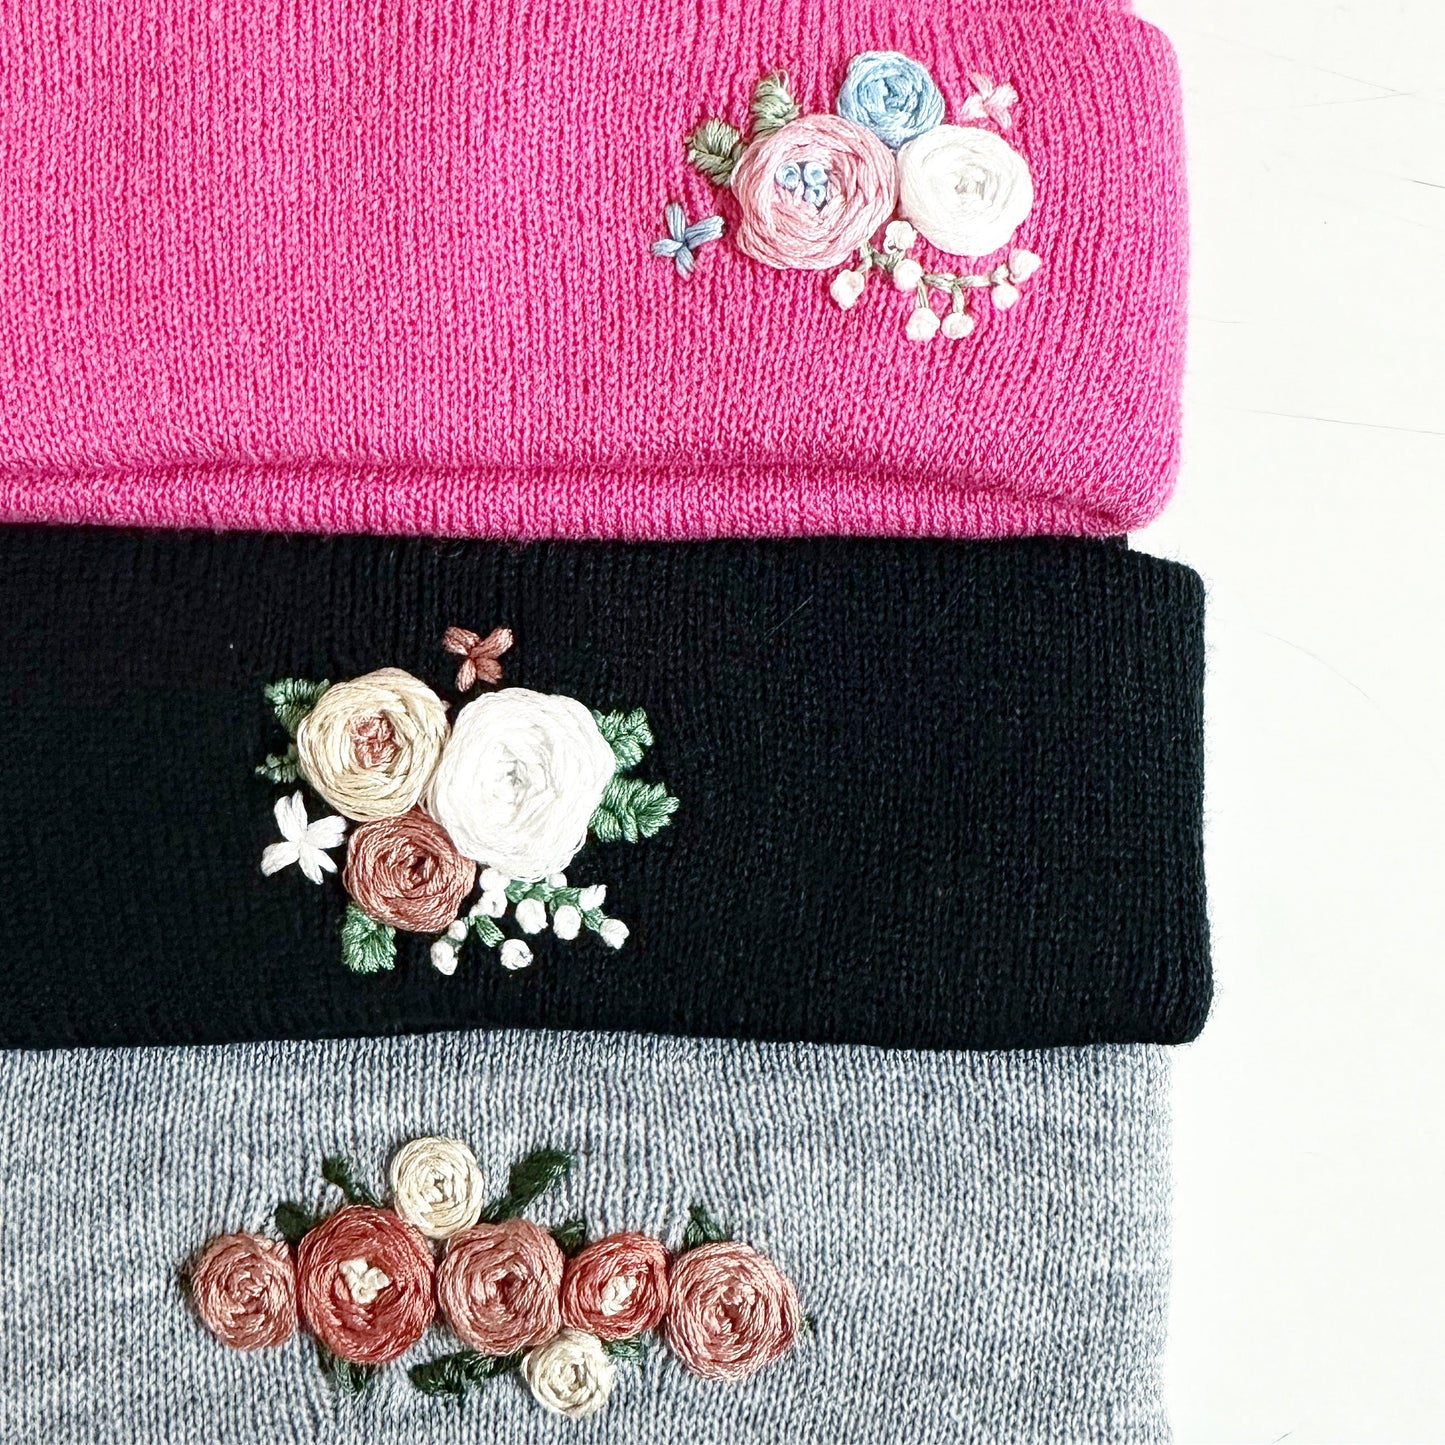 Hand Embroidered Floral Beanie: Black